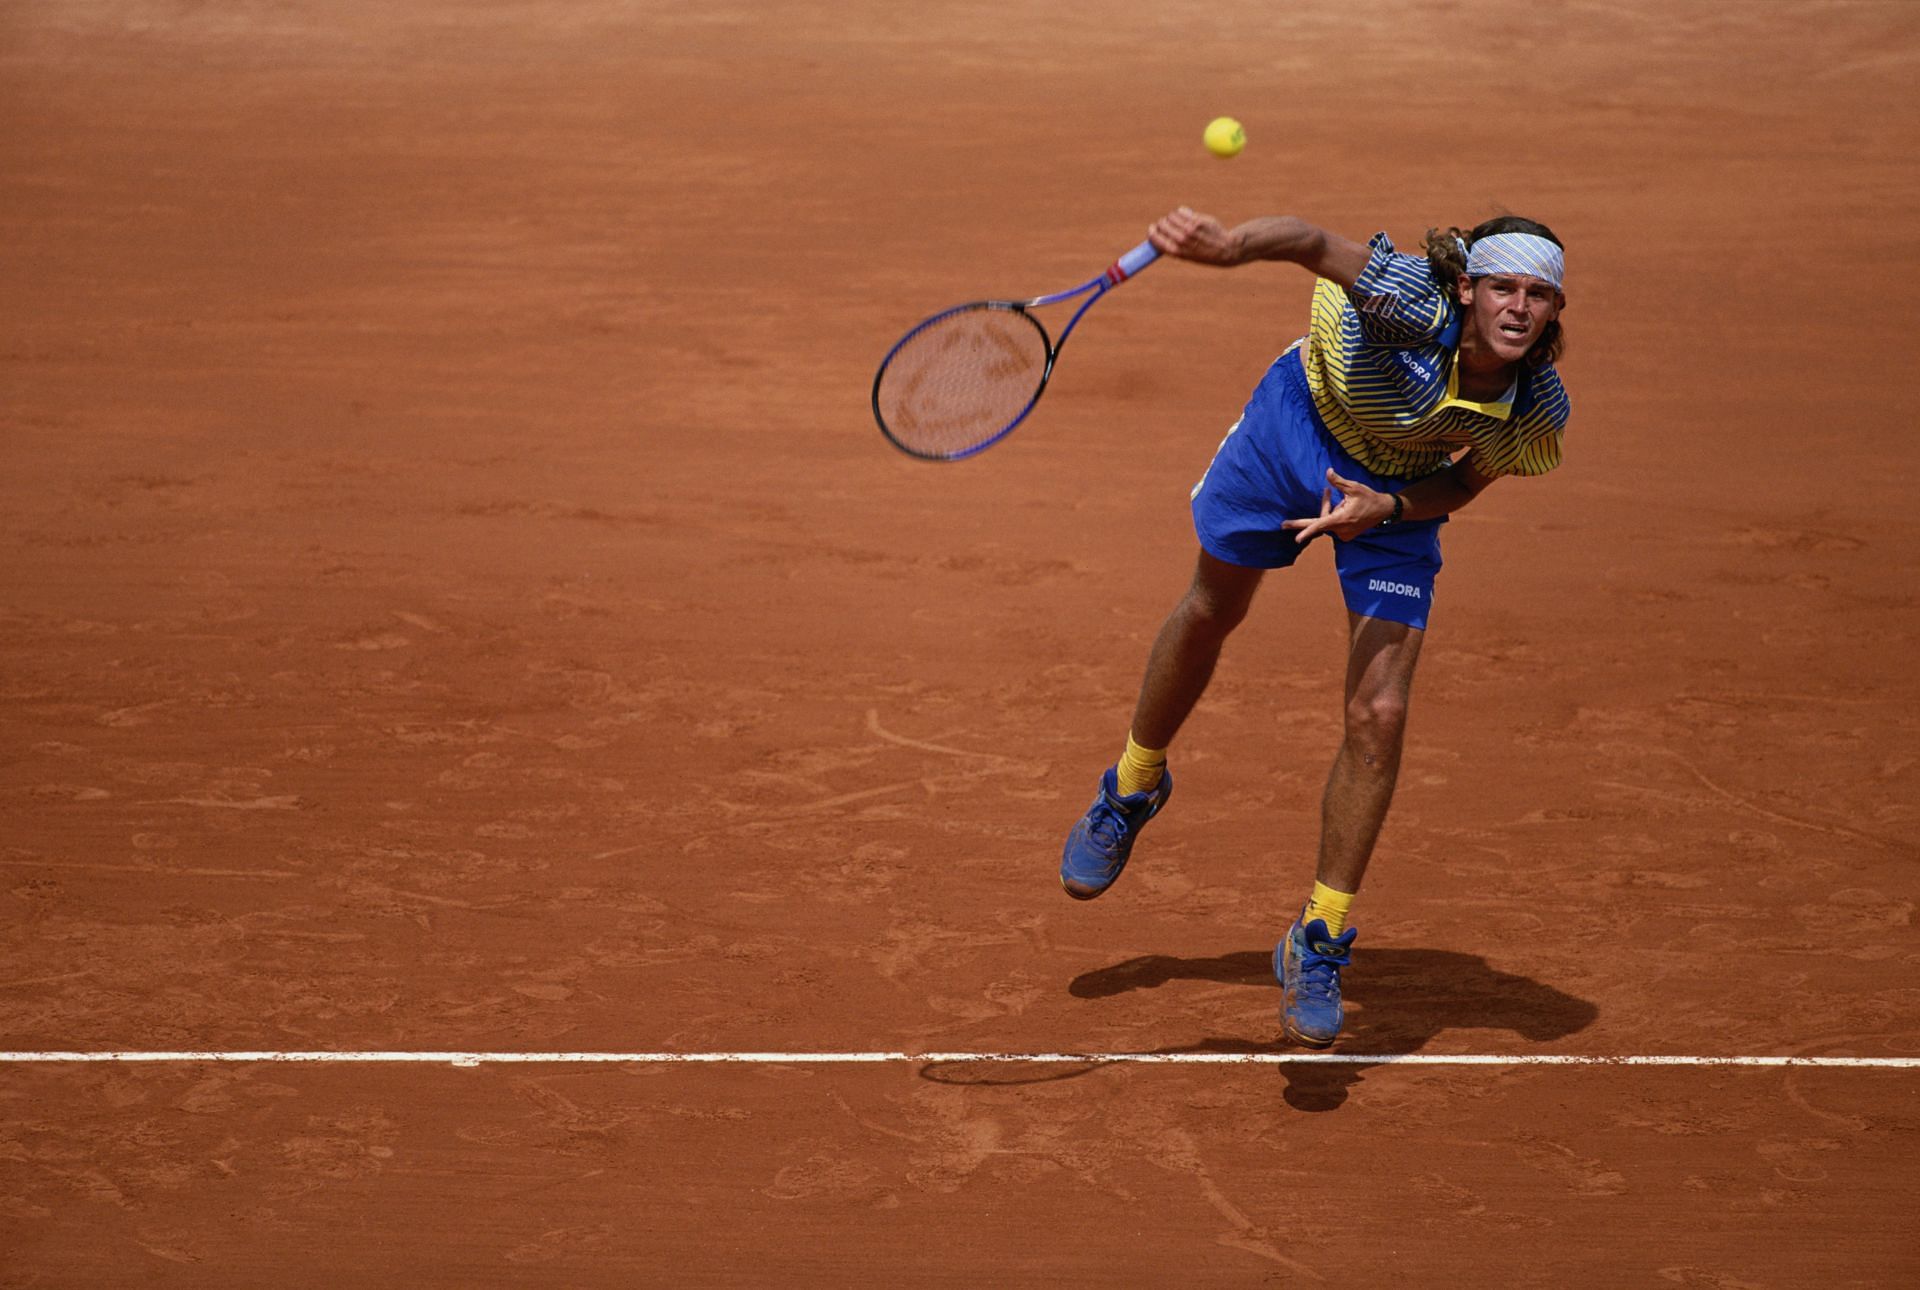 Gustavo Kuerten scripted a memorable triumph at the French Open in 1997